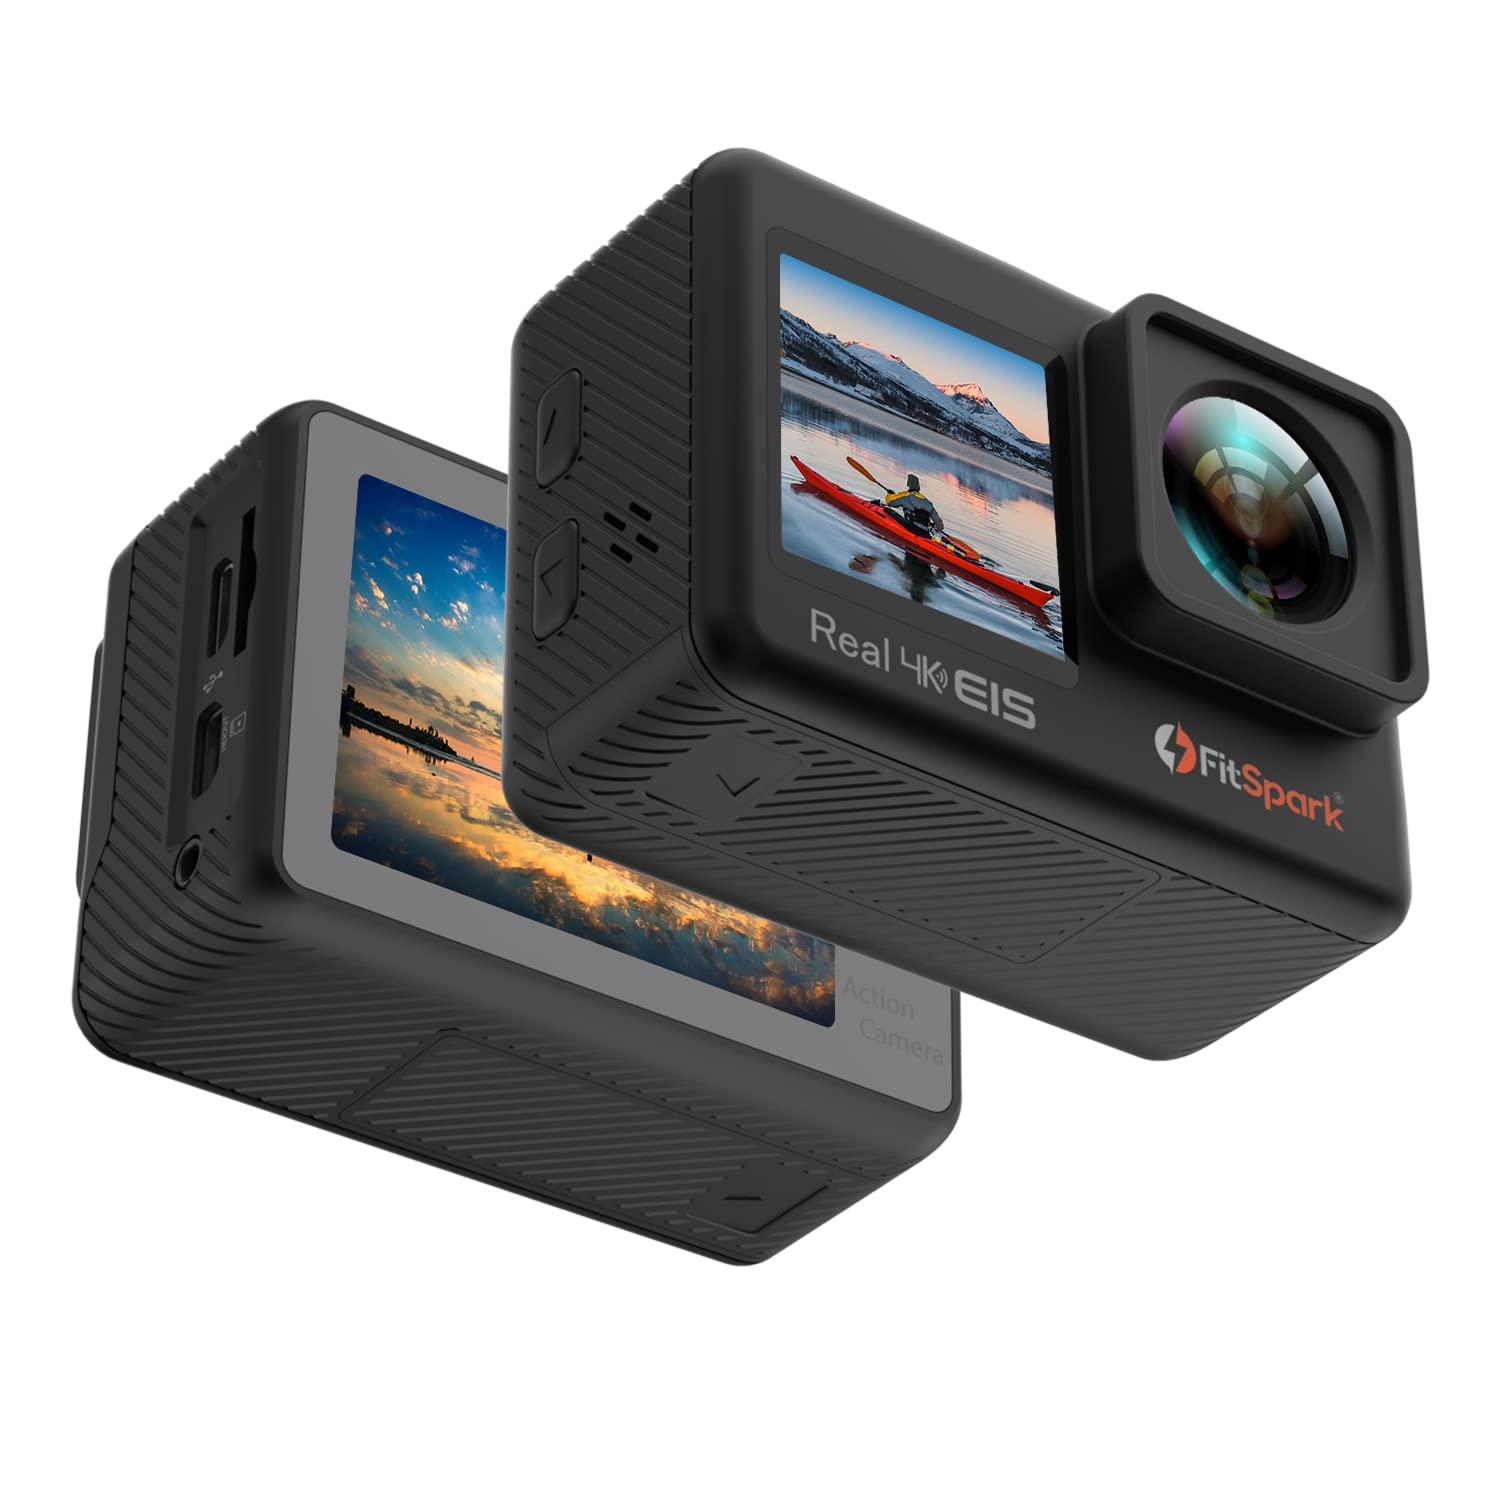 FitSpark Eagle i9 Plus Professional Dual Screen Native 4K 30FPS WiFi Action Camera with Drone Auto-Connection